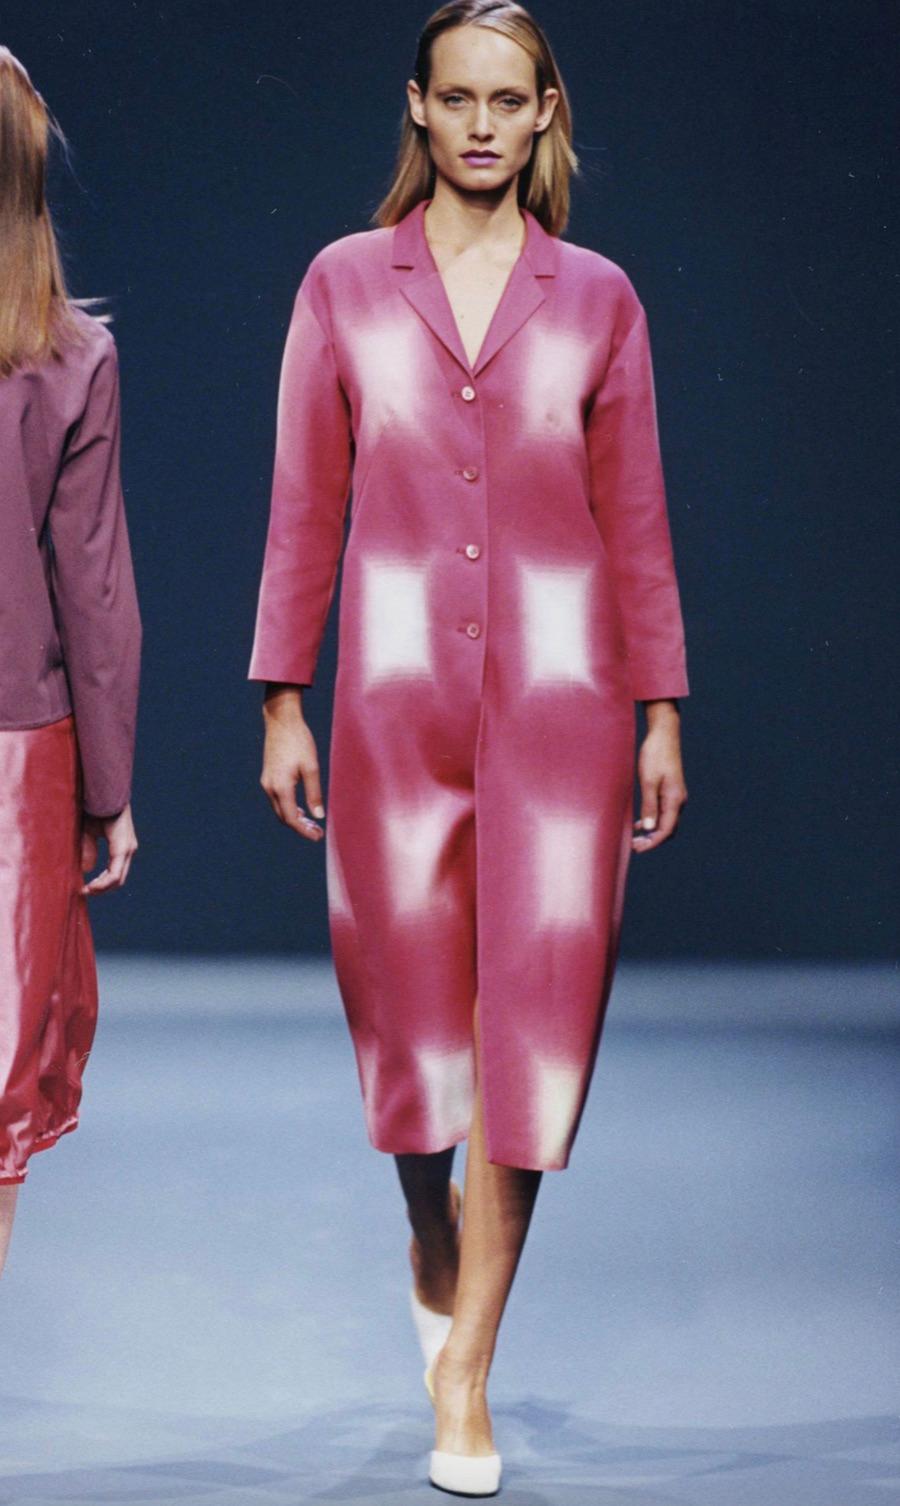 The red geometric ombré pattern on this Spring/Summer 1998 Prada mini dress was highlighted on several runway looks. This simple and chic column slip dress features a wide scoop neckline and is a fabulous vintage Prada addition to any wardrobe.